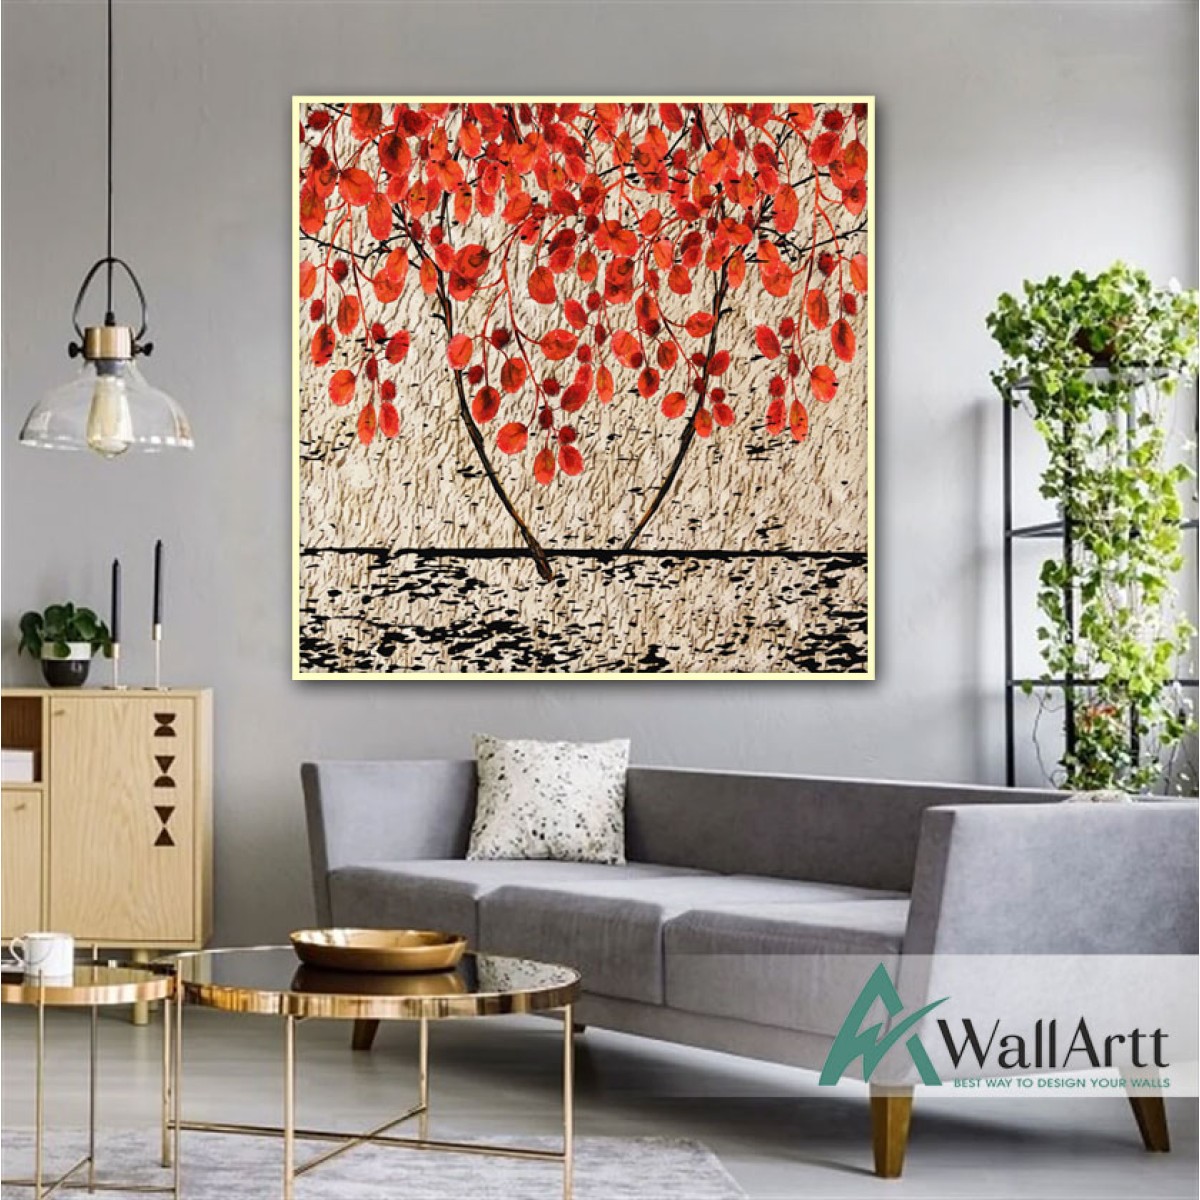 Red Leaves Textured Partial Oil Painting